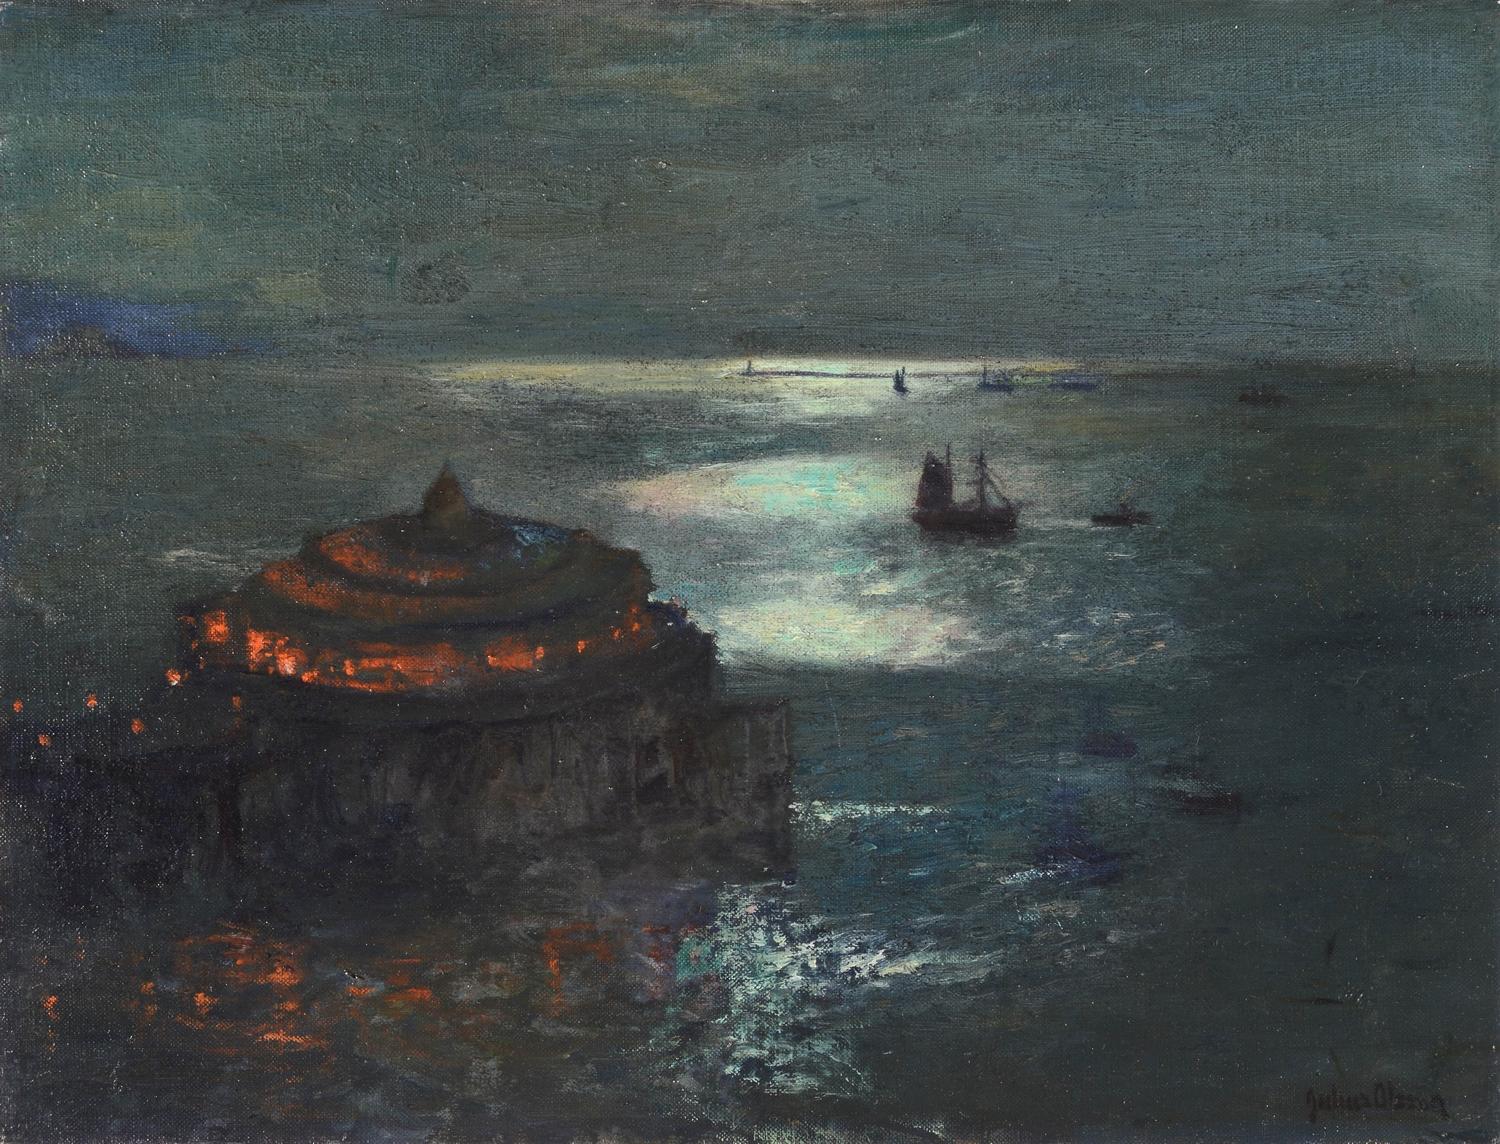 Julius Olsson  Landscape Painting - "The Pier, Plymouth - by Moonlight"